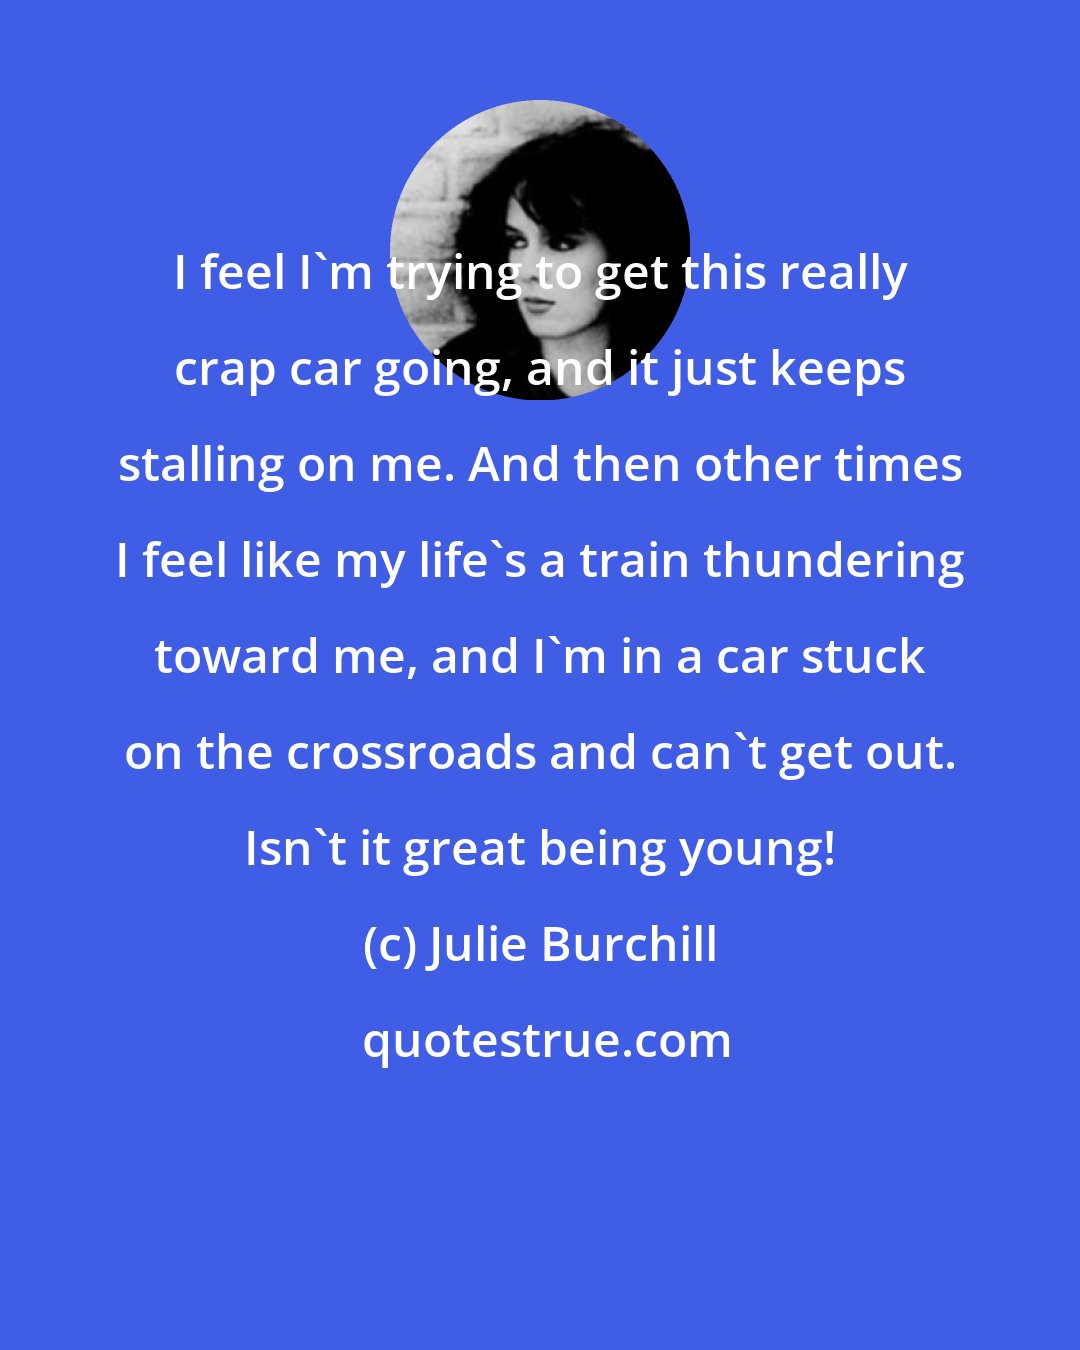 Julie Burchill: I feel I'm trying to get this really crap car going, and it just keeps stalling on me. And then other times I feel like my life's a train thundering toward me, and I'm in a car stuck on the crossroads and can't get out. Isn't it great being young!